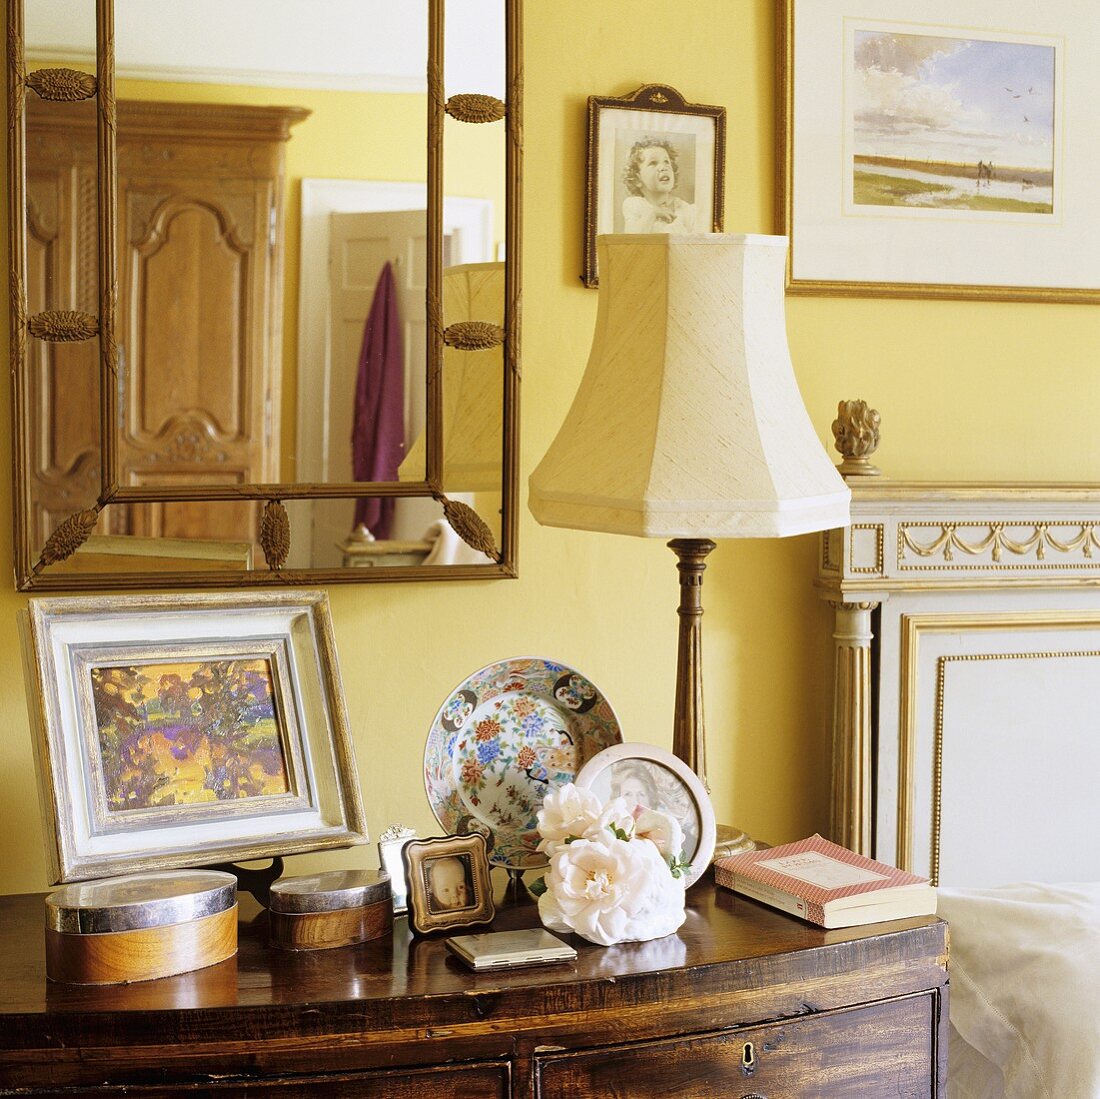 A table lamp with a white shade on a bedside table and a mirror above it on a yellow wall